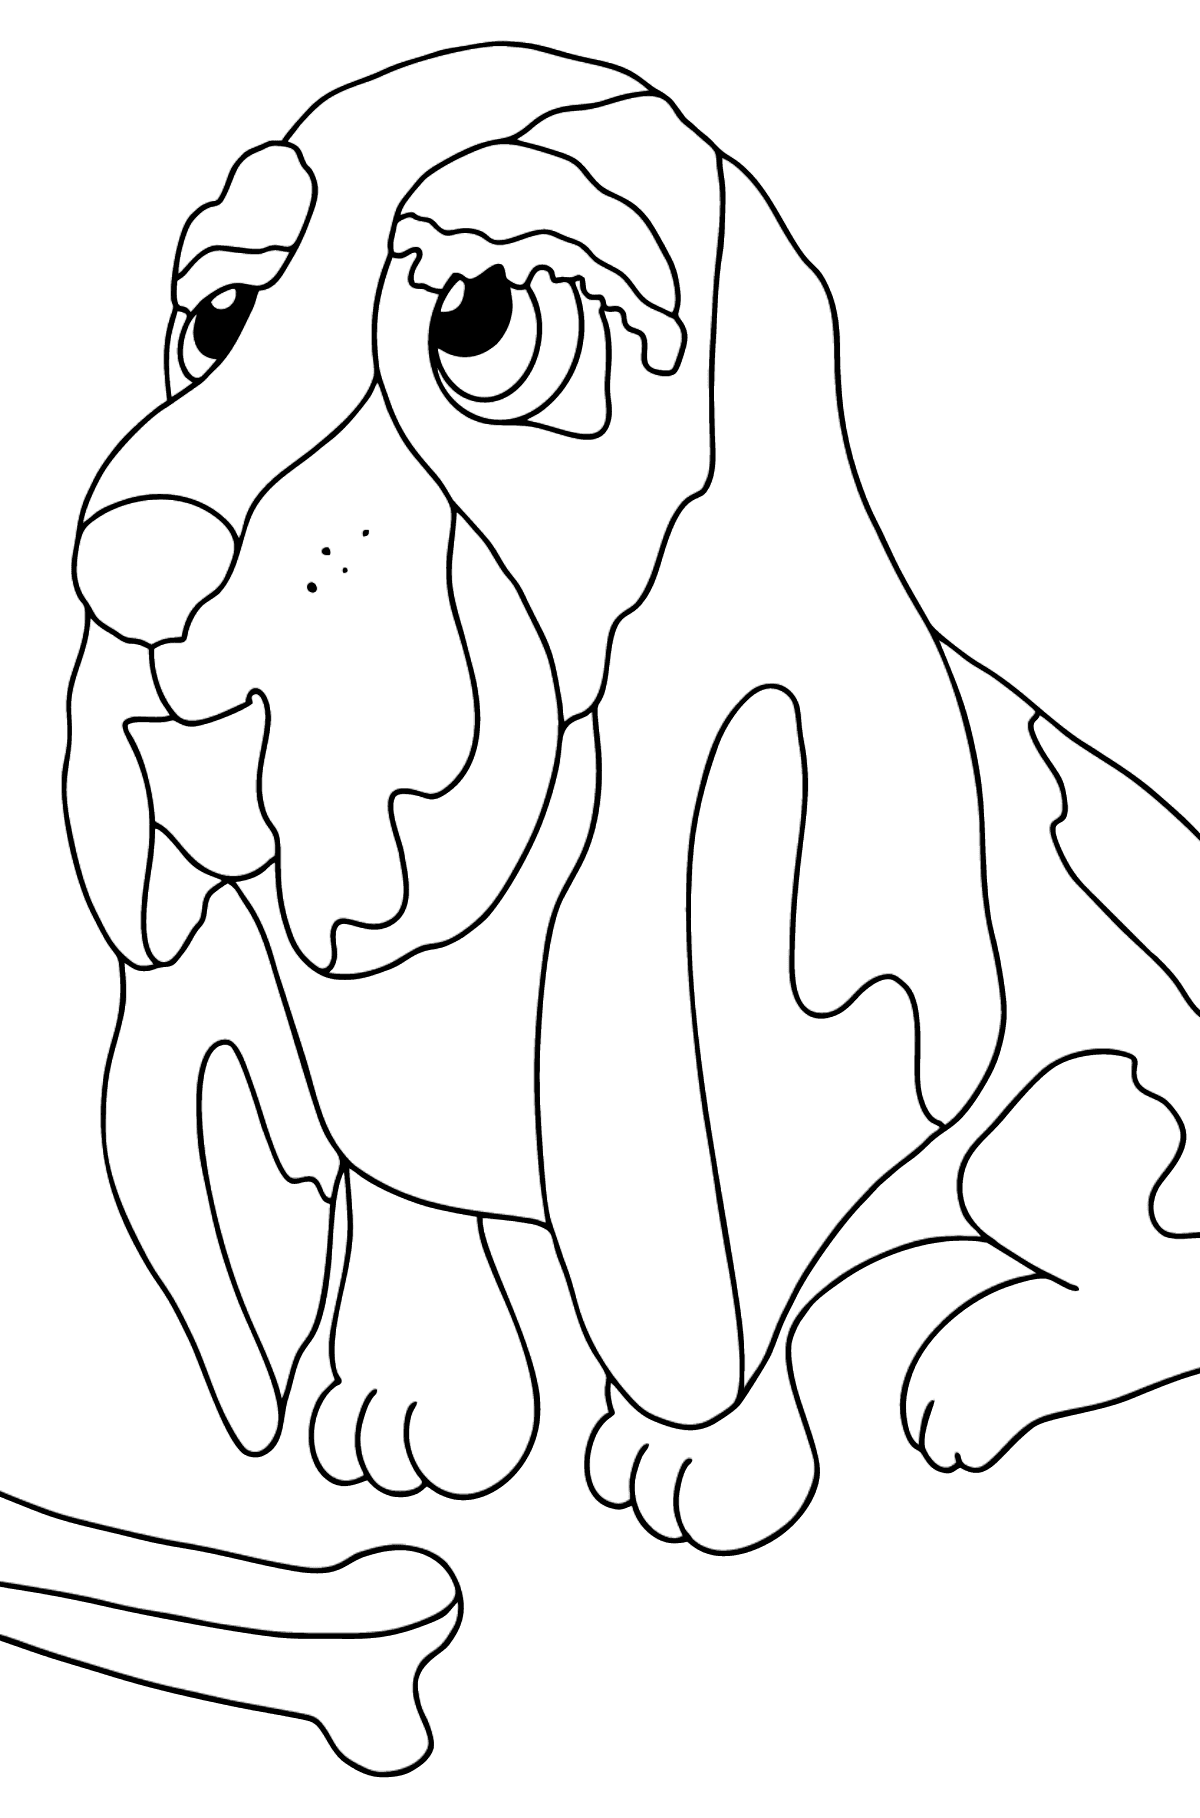 Coloring Page - A Dog with a Bone - Coloring Pages for Kids